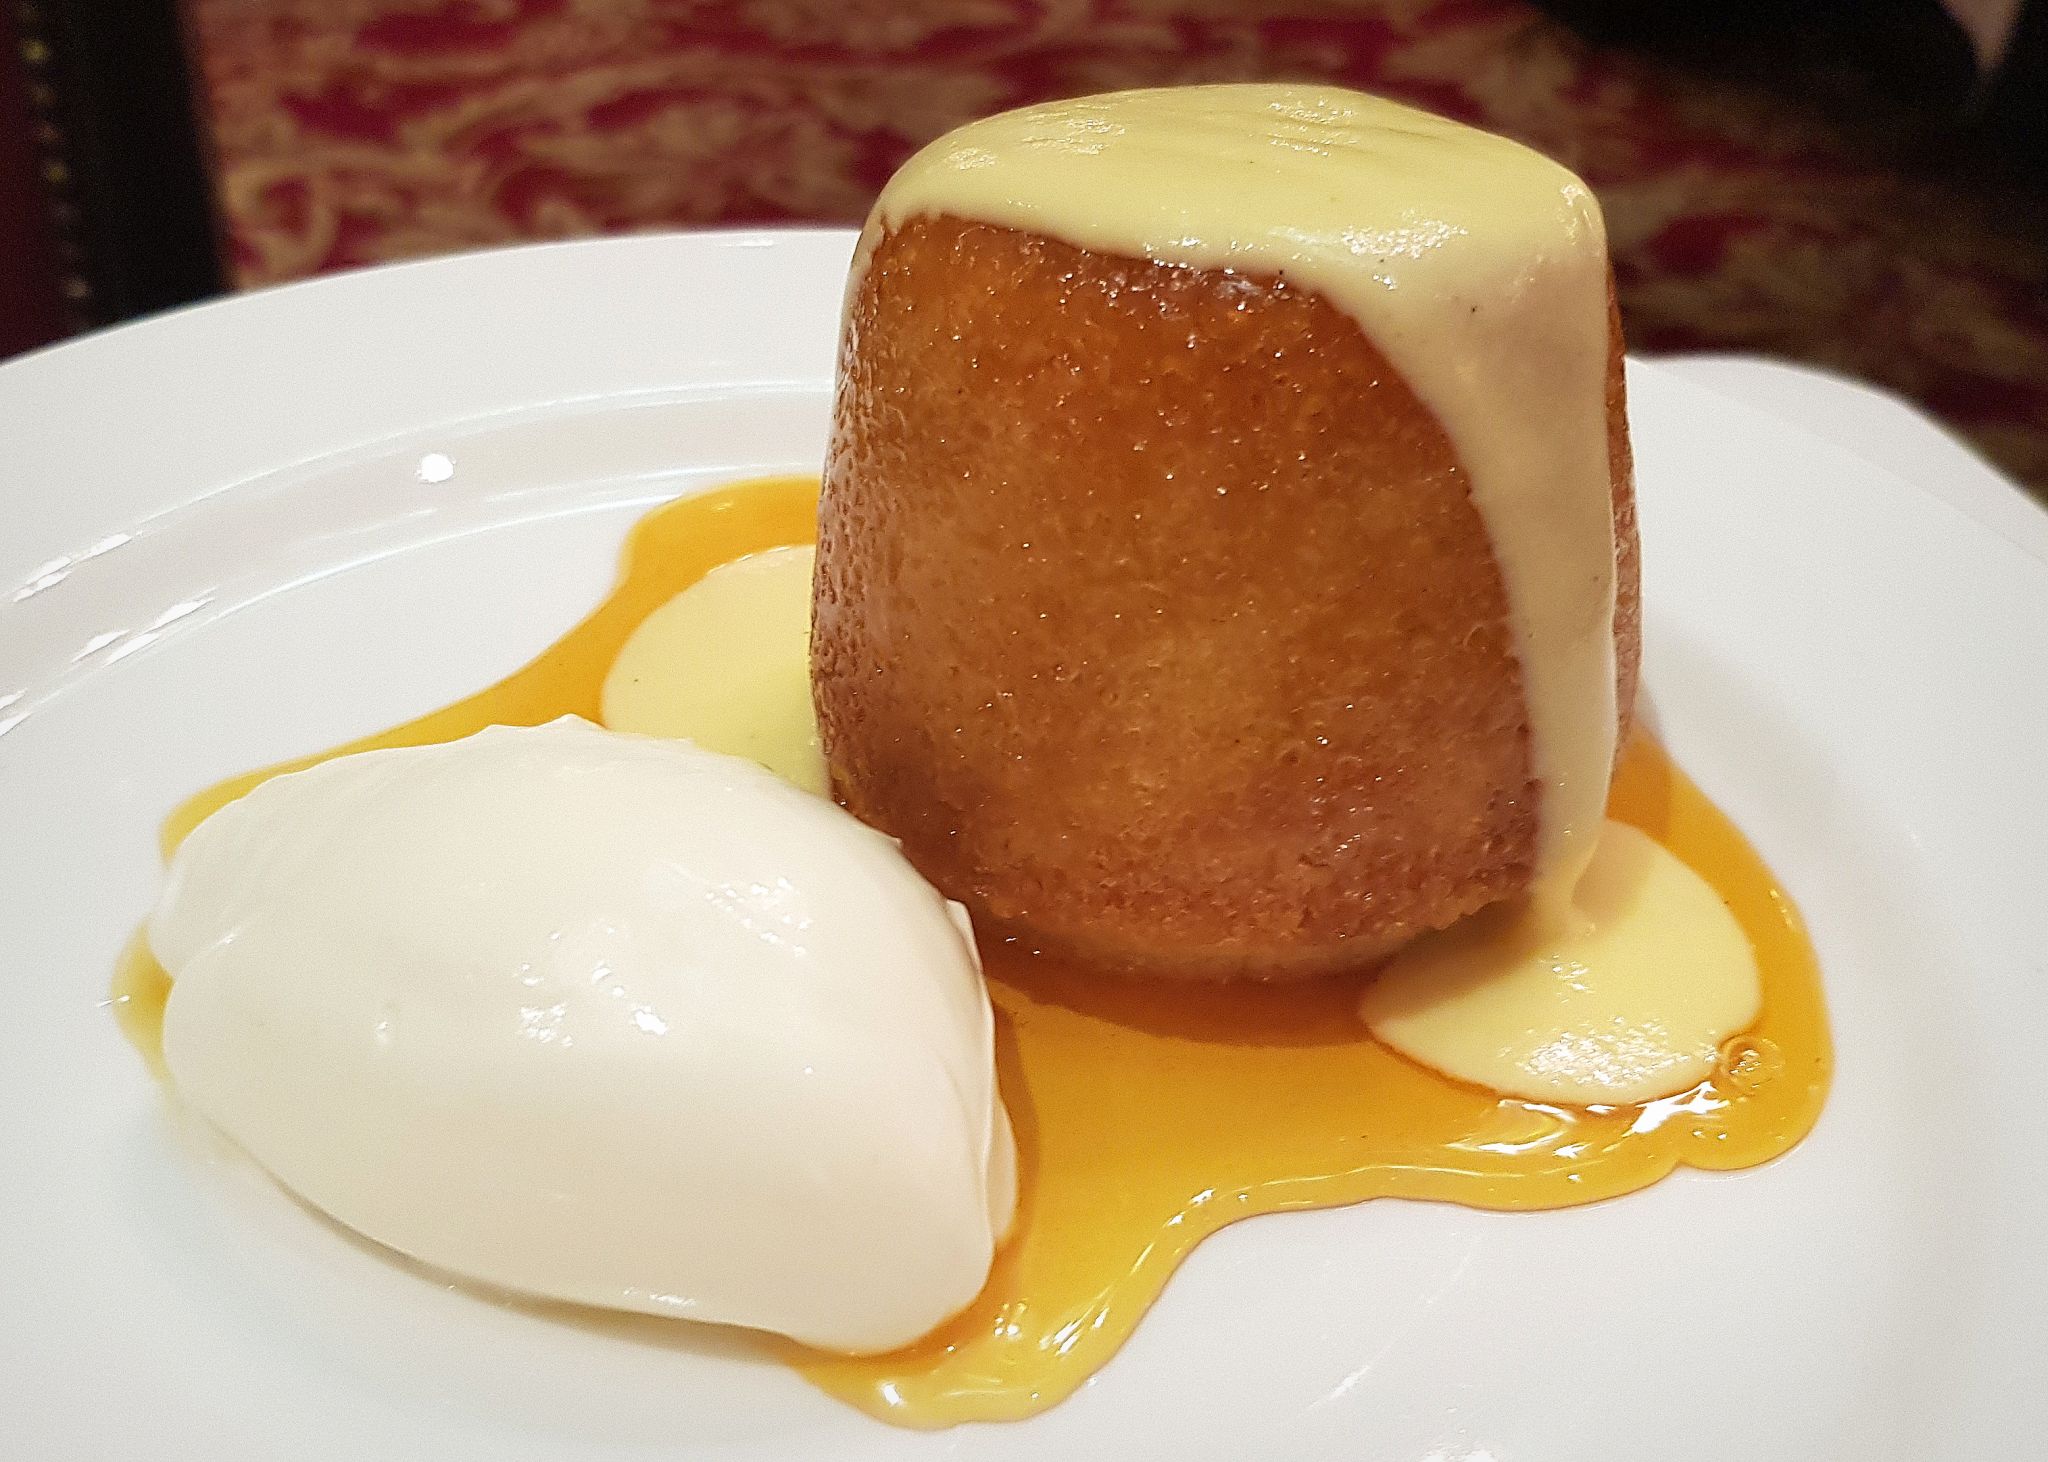 "A Tale of Two Puddings" - RULES RESTAURANT and THE GAME BIRD